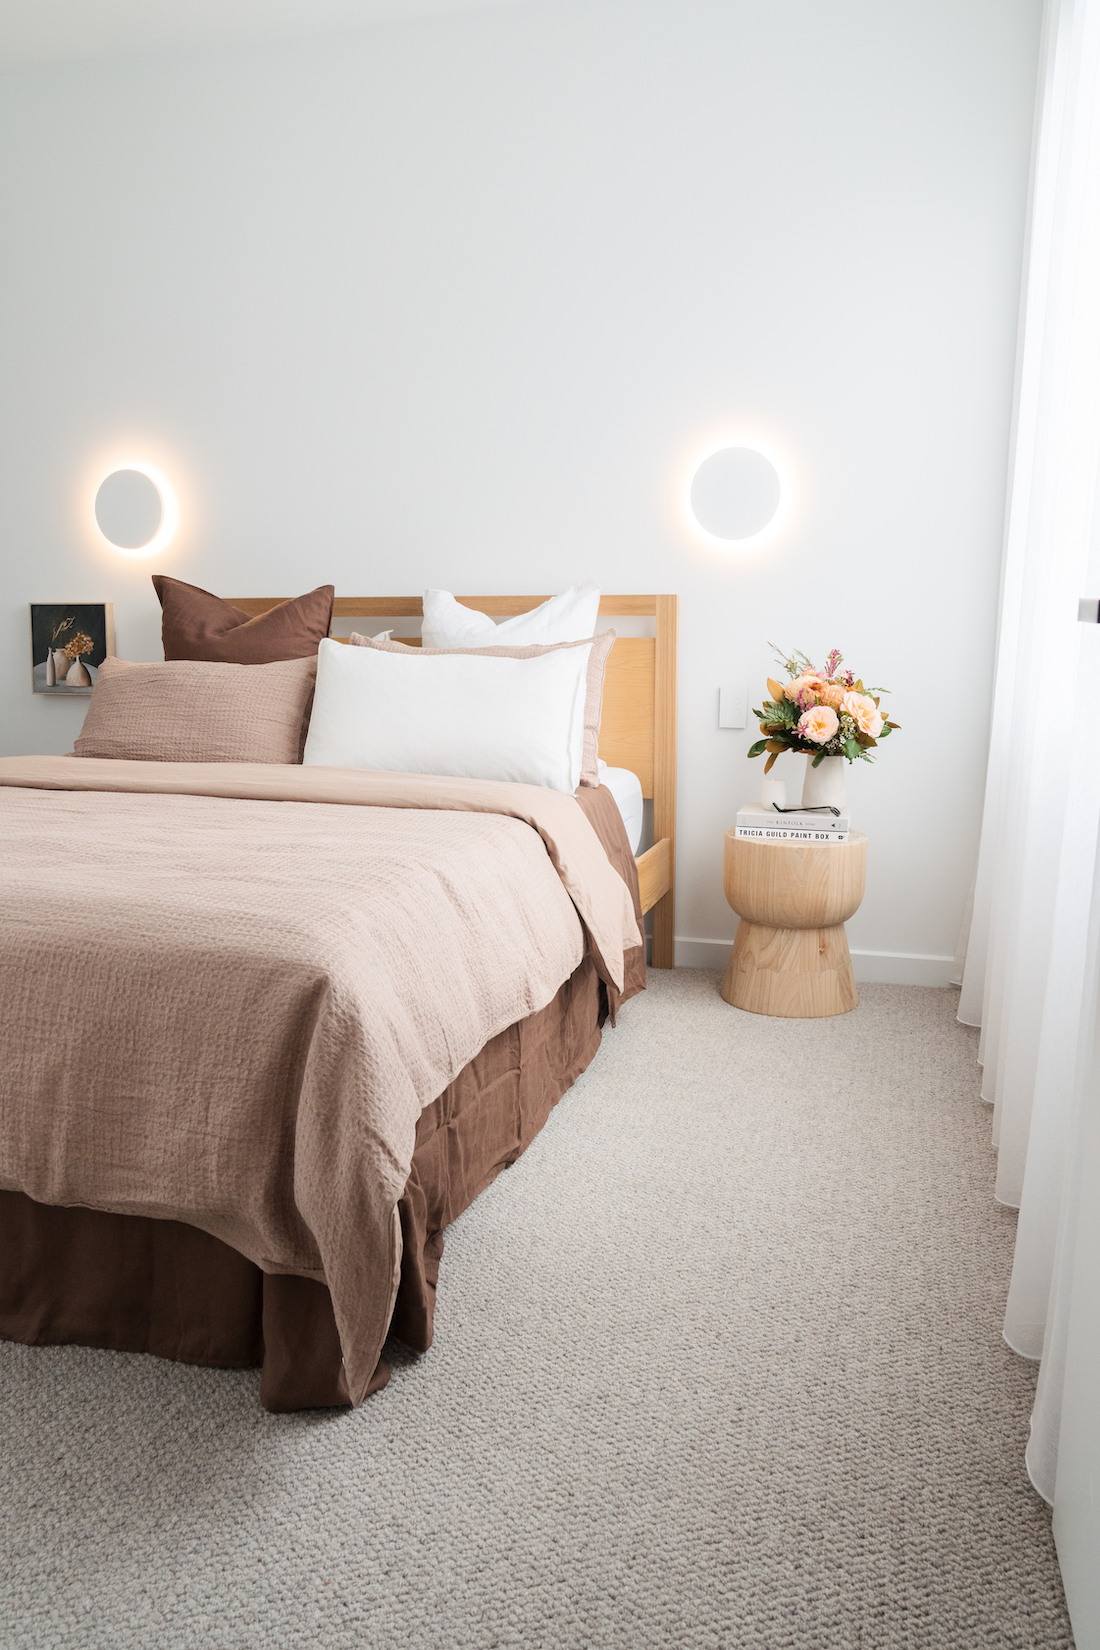 Bedroom with round wall lights